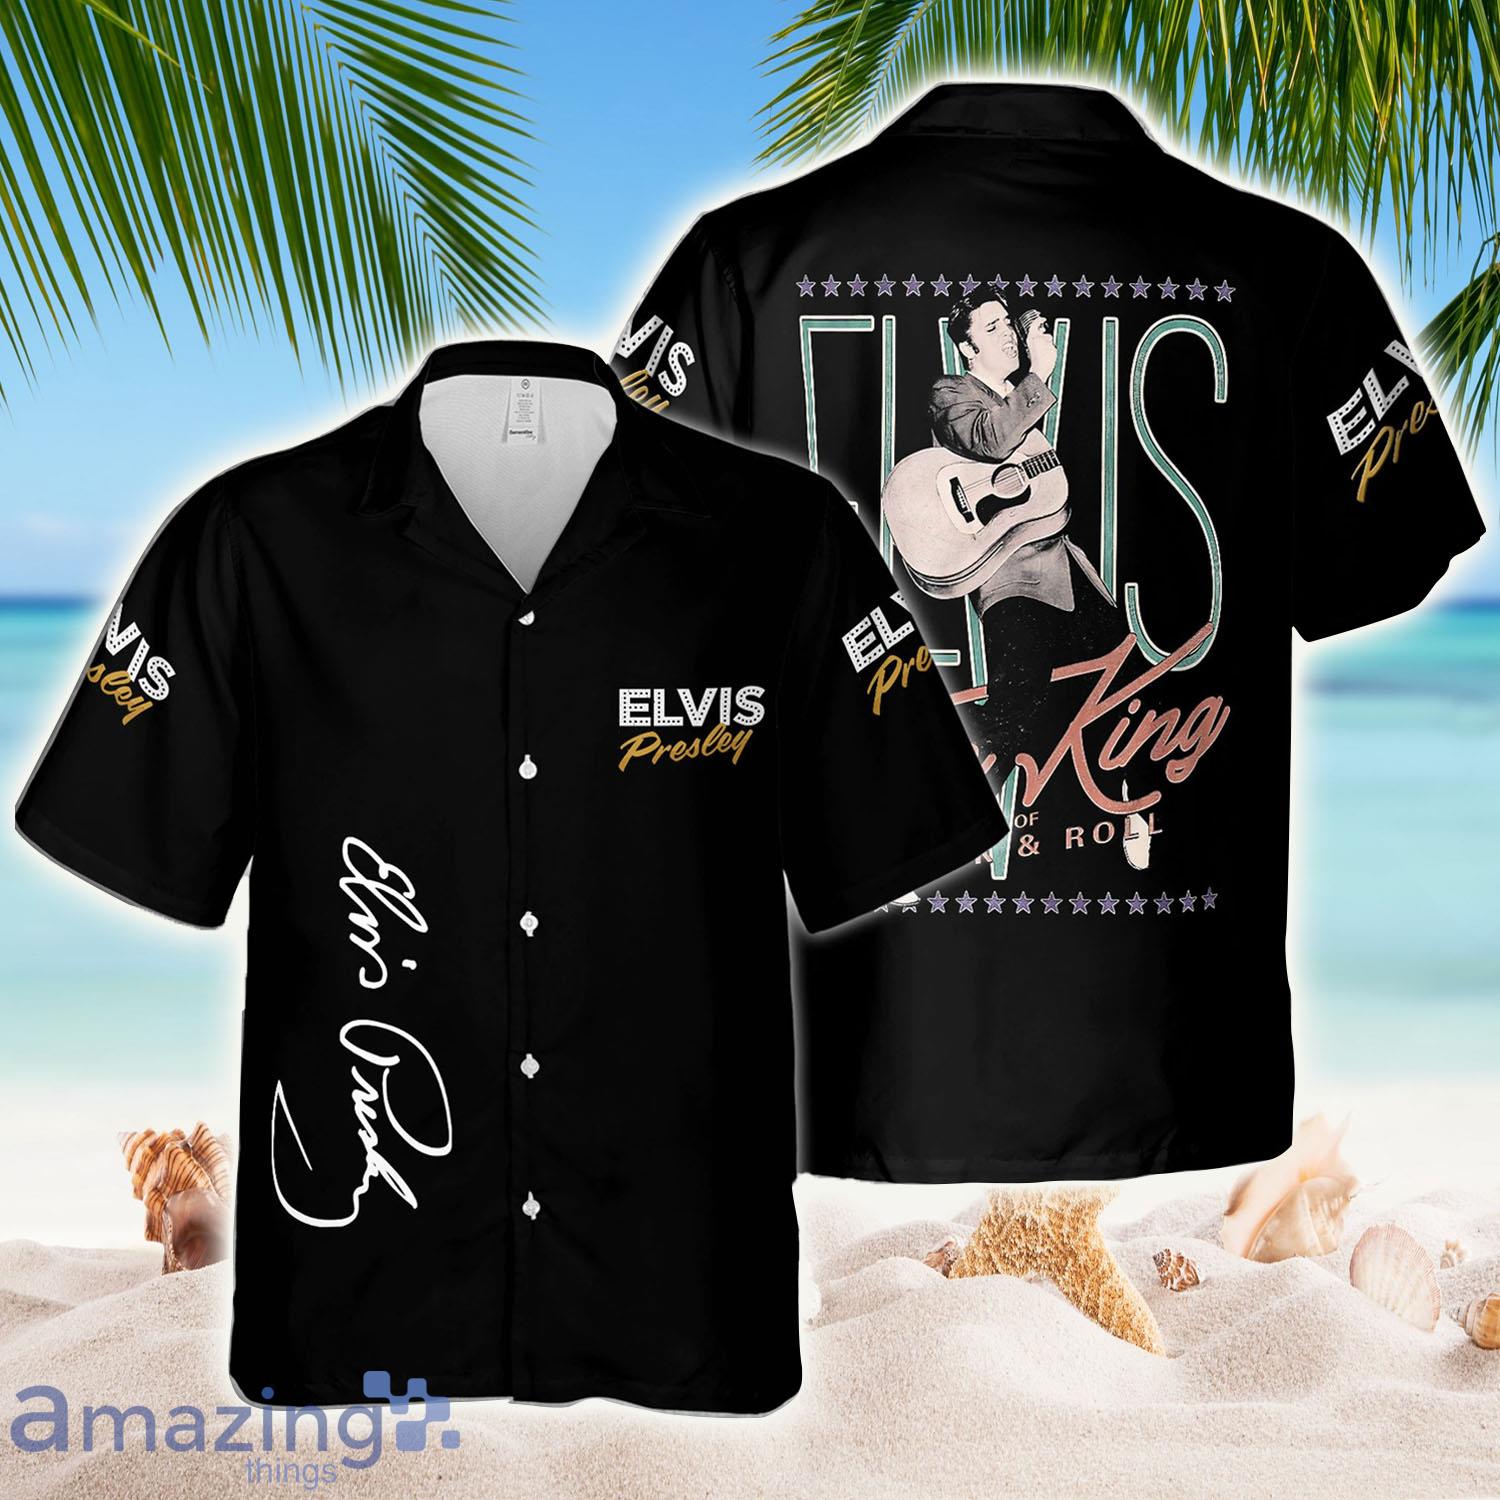 Elvis Presley The King Of Rock And Roll Hawaiian Shirt - Elvis Presley The King Of Rock And Roll Hawaiian Shirt